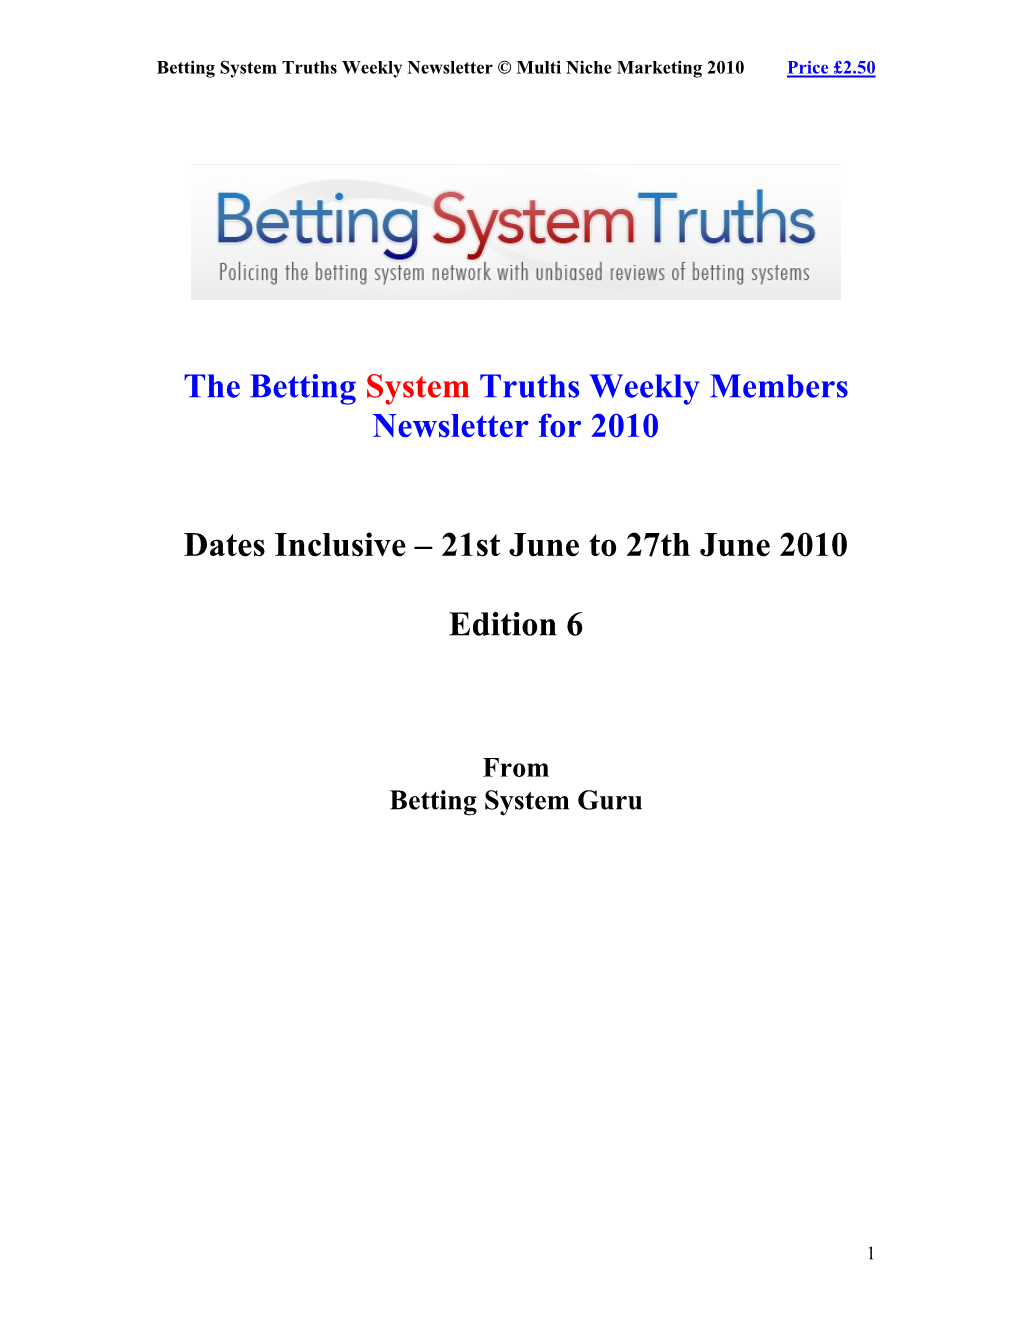 The Betting System Truths Weekly Members Newsletter for 2010 Dates